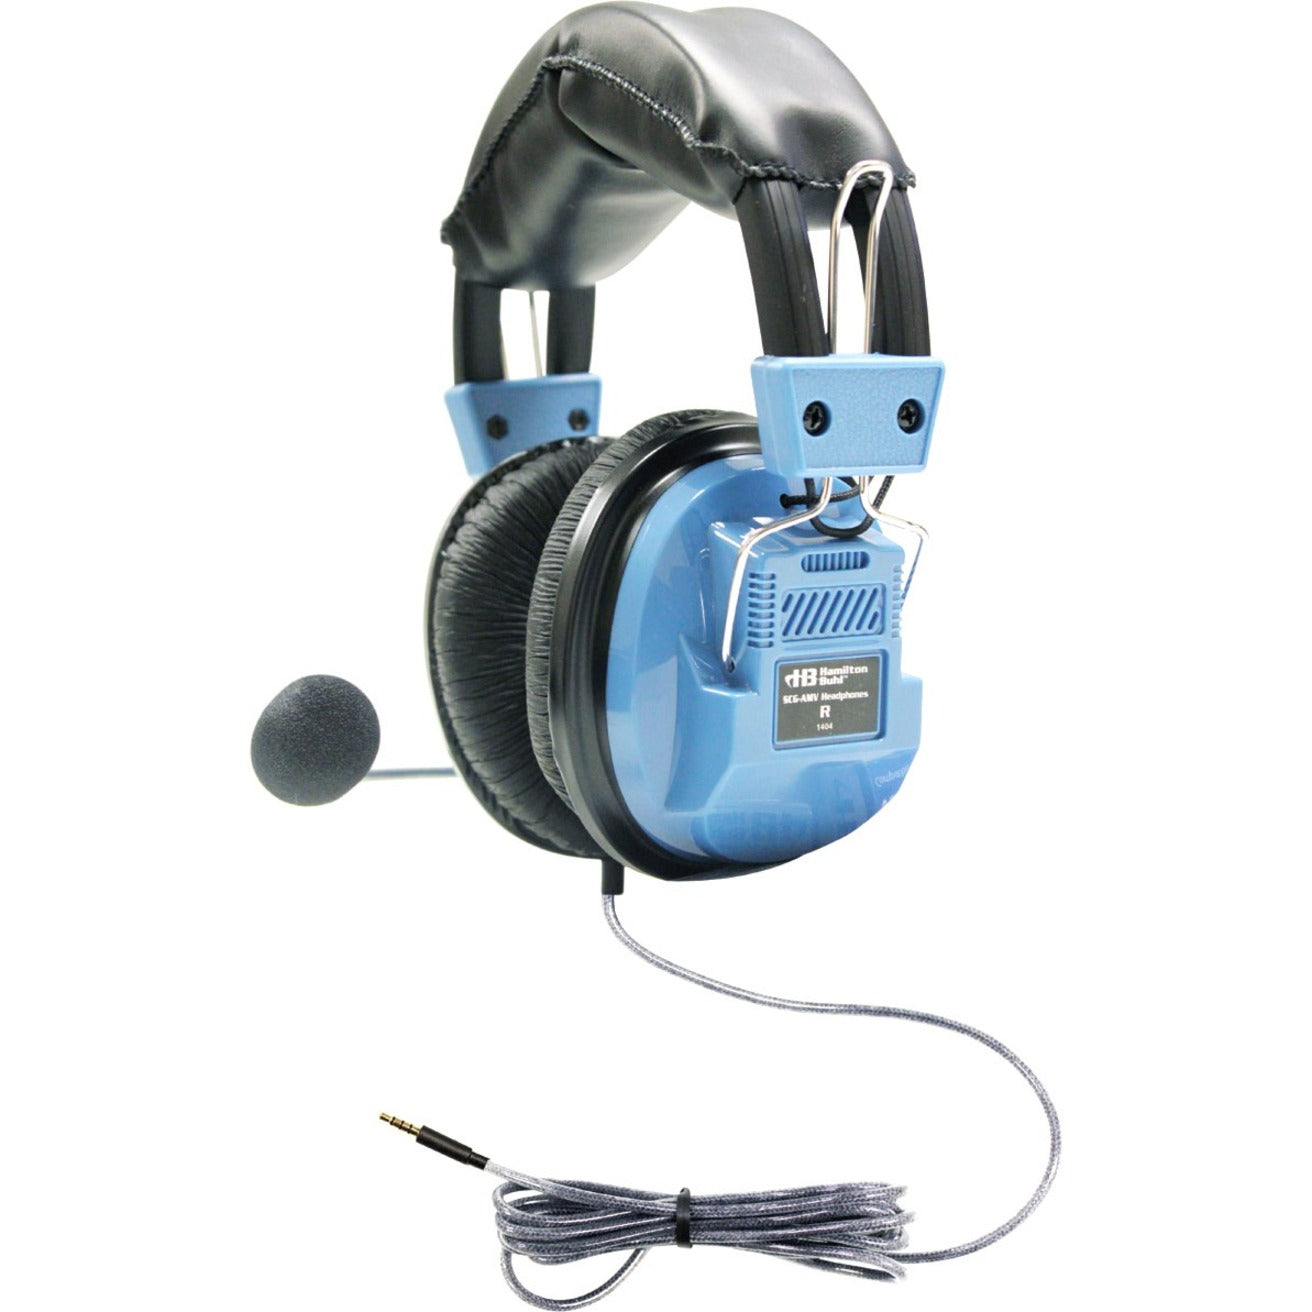 Ergoguys SCG-AMV Deluxe Headset with Gooseneck Microphone and TRRS Plug, Over-the-head, Light Blue, Padded Headband, Washable, Swivel Mechanism